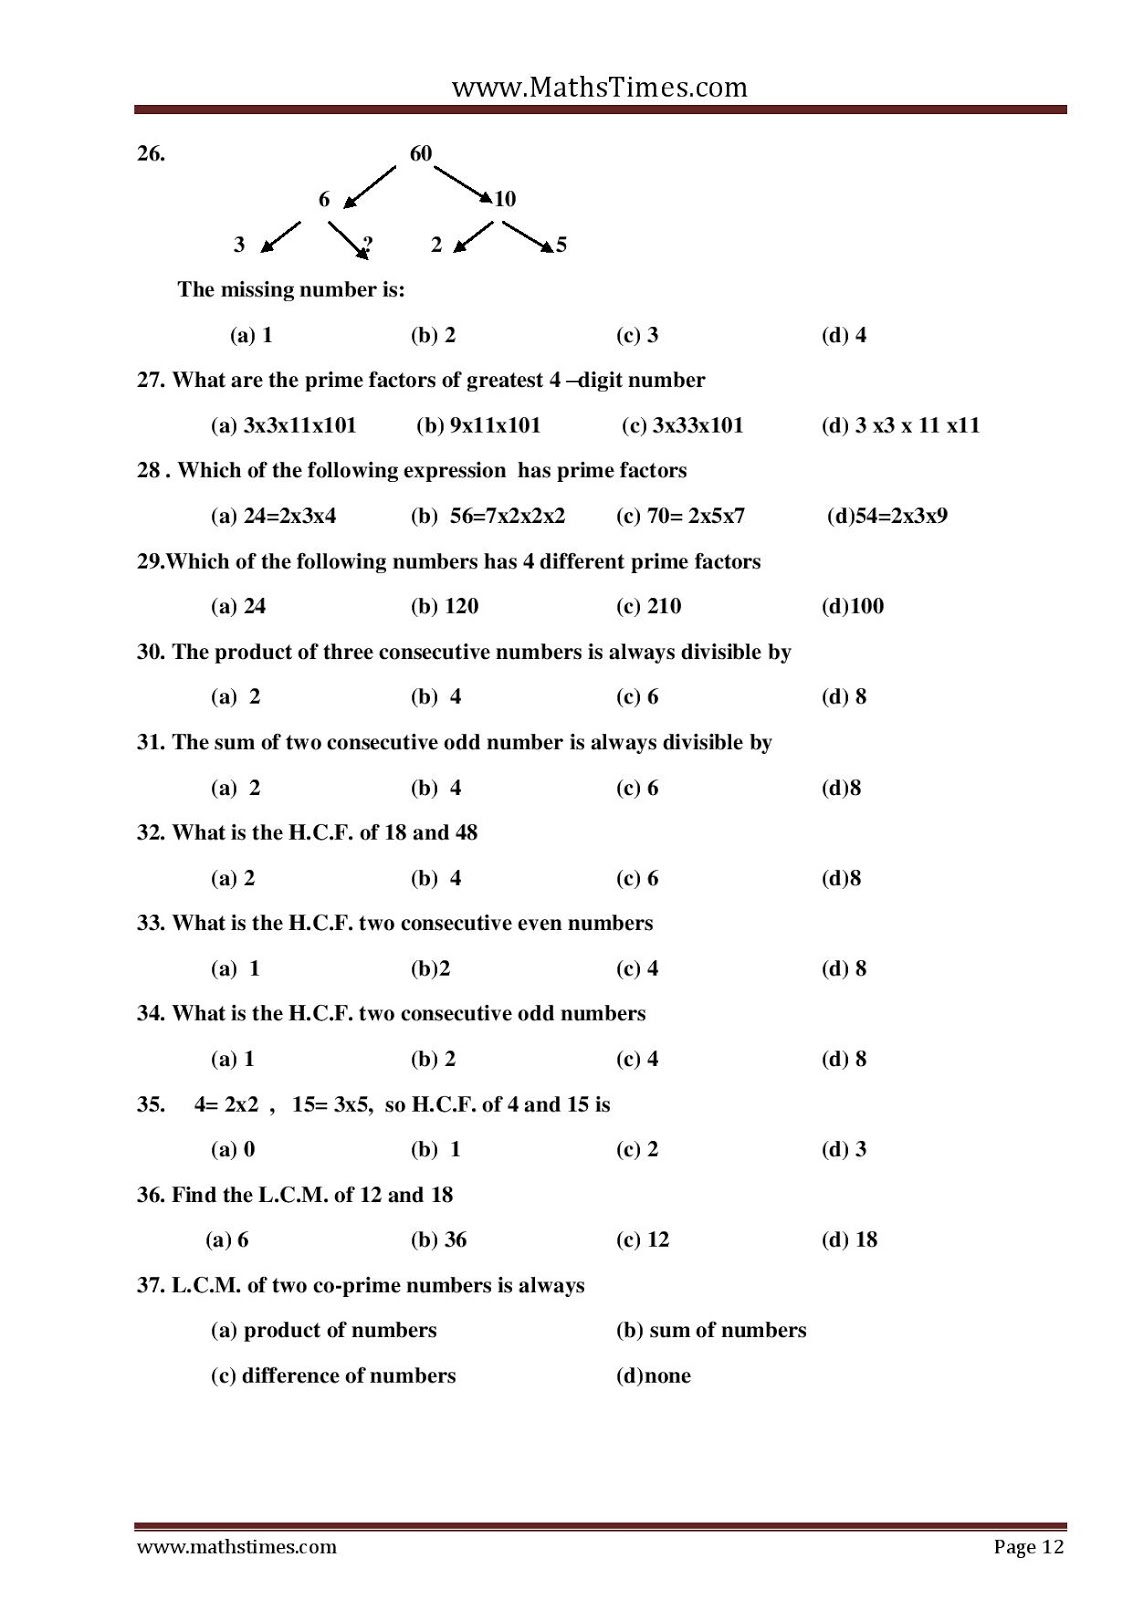 apsg-class-6-worksheet-whole-numbers-playing-with-numbers-basic-geometry